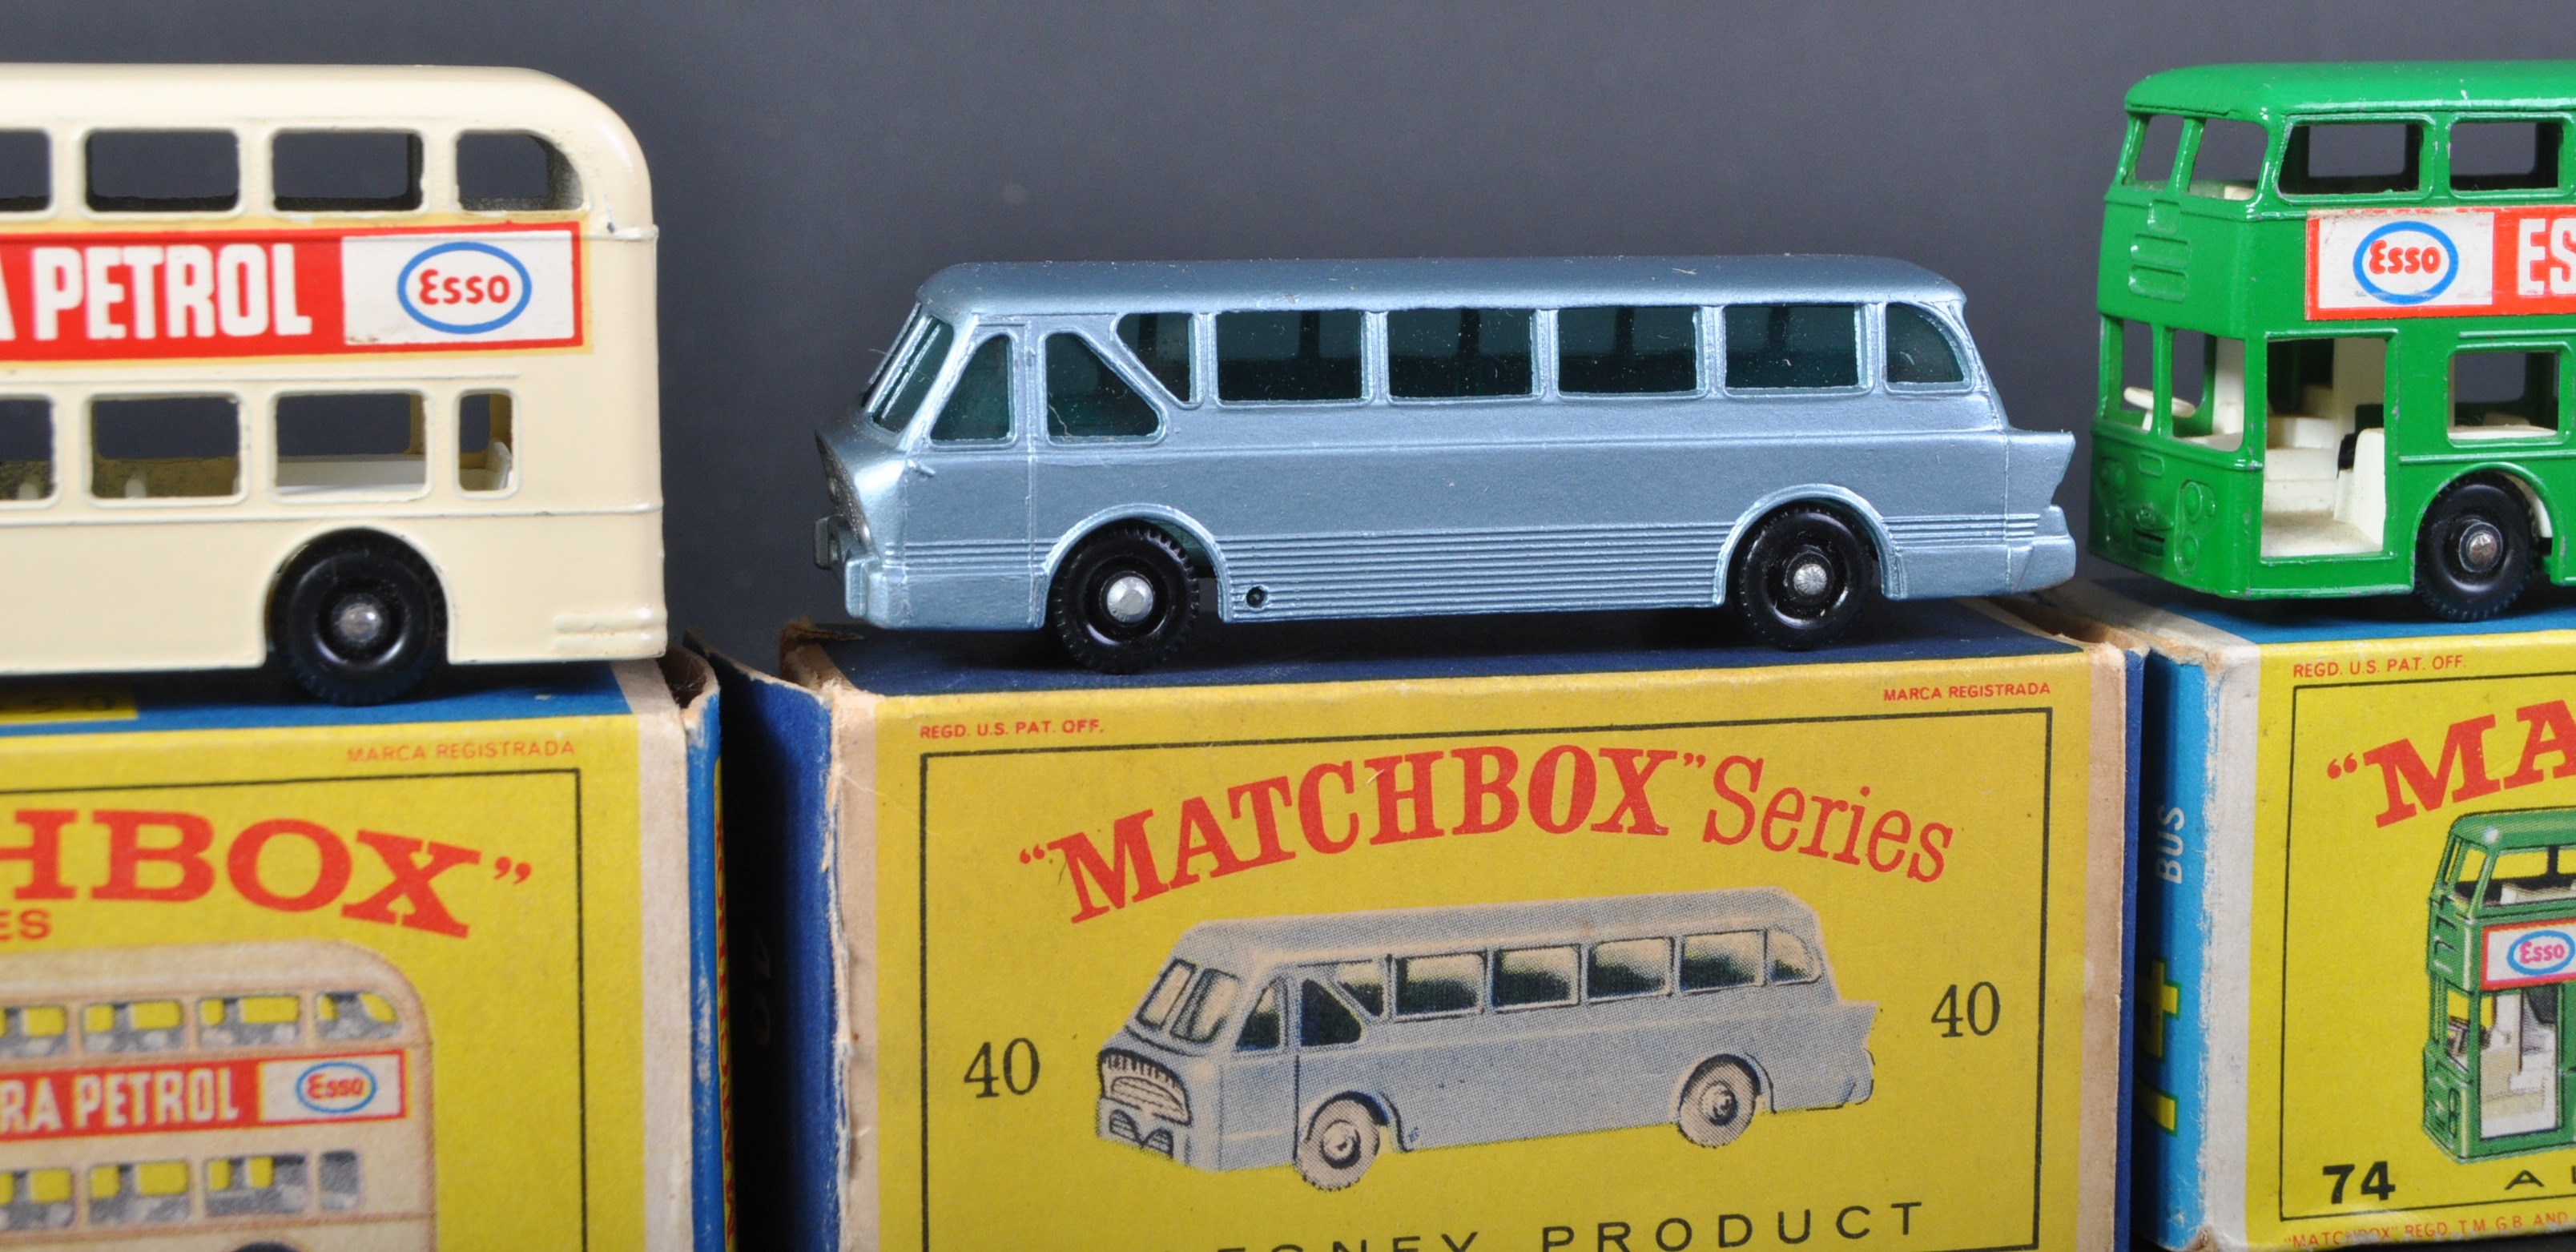 COLLECTION OF X3 VINTAGE LESNEY MATCHBOX SERIES DIECAST MODELS - Image 3 of 5